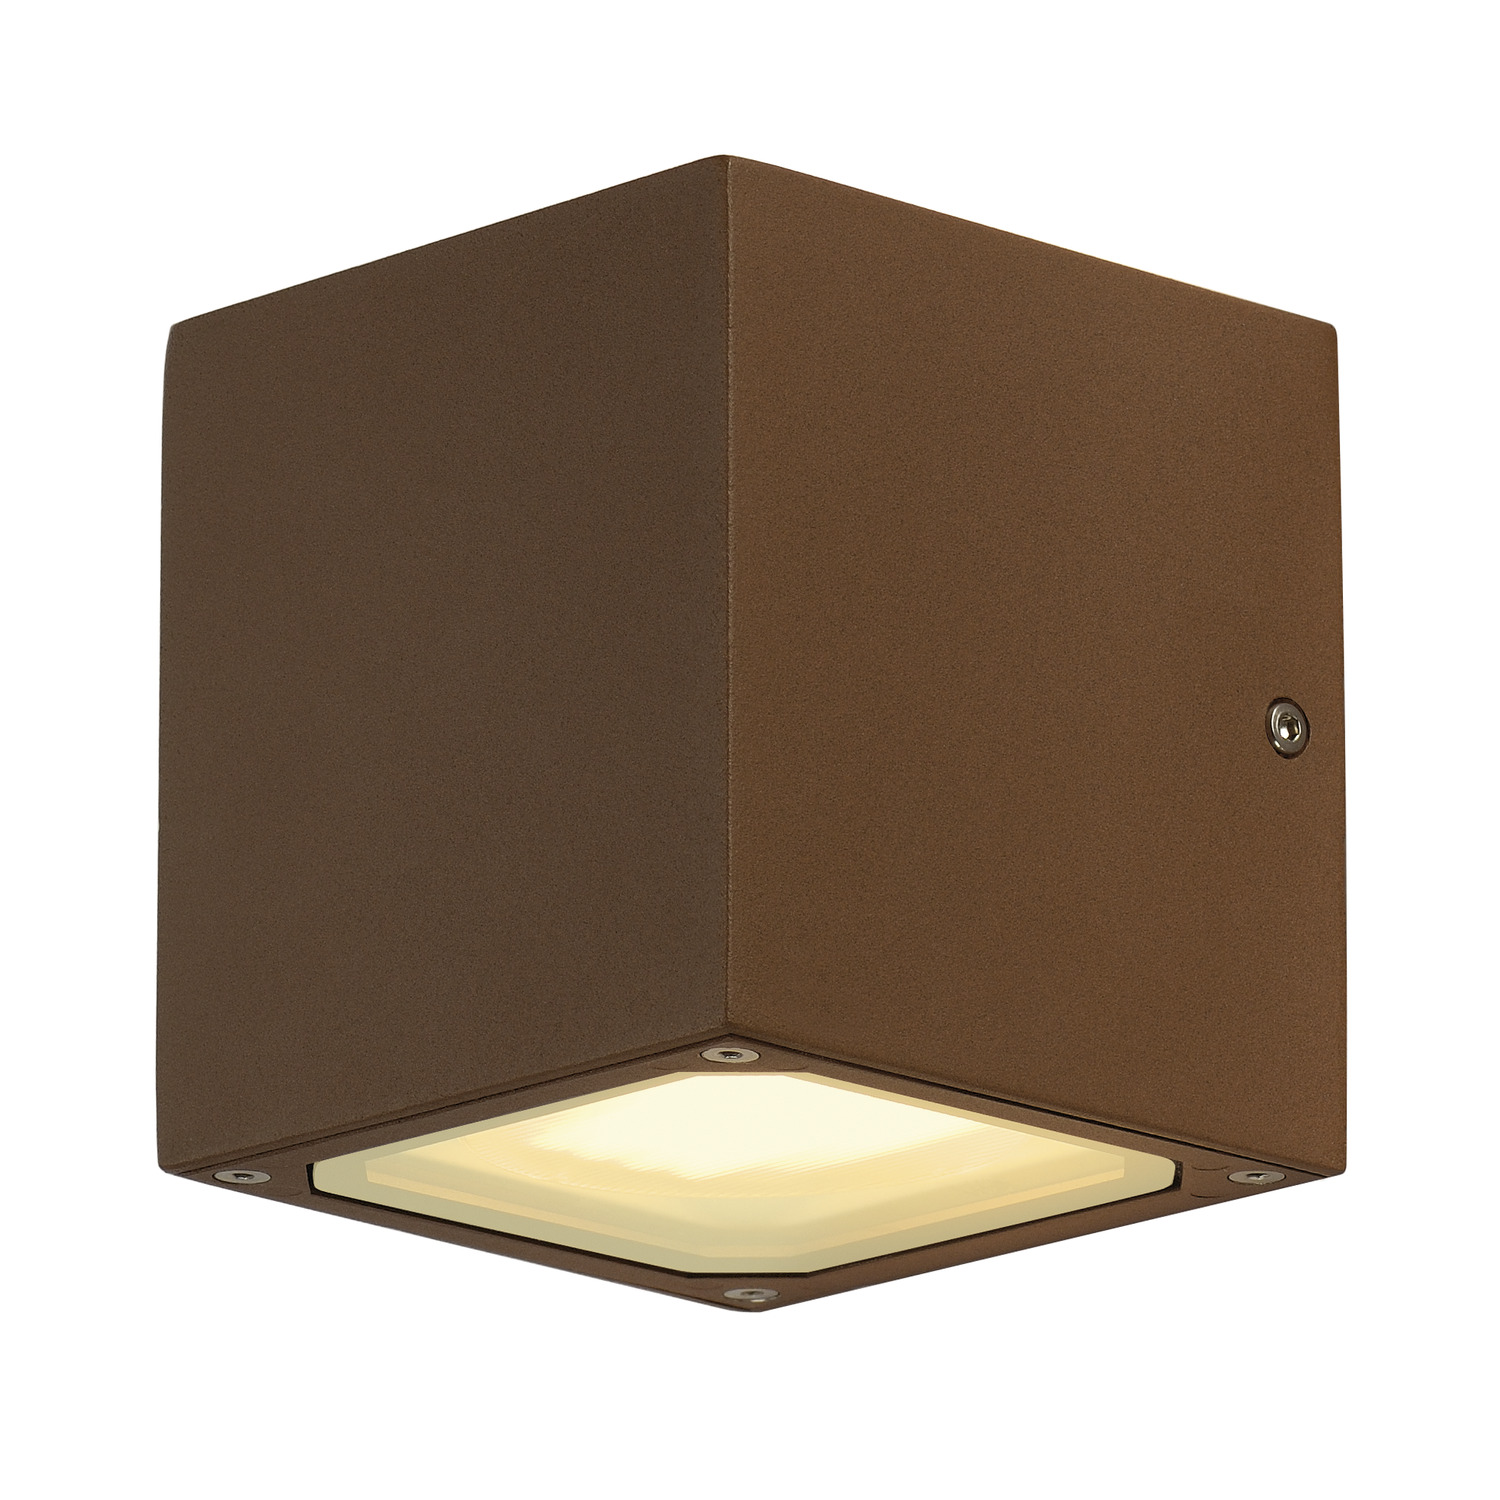 SLV SITRA CUBE, Outdoor Wandleuchte, TCR-TSE, IP44, rost, max. 18W - 232537